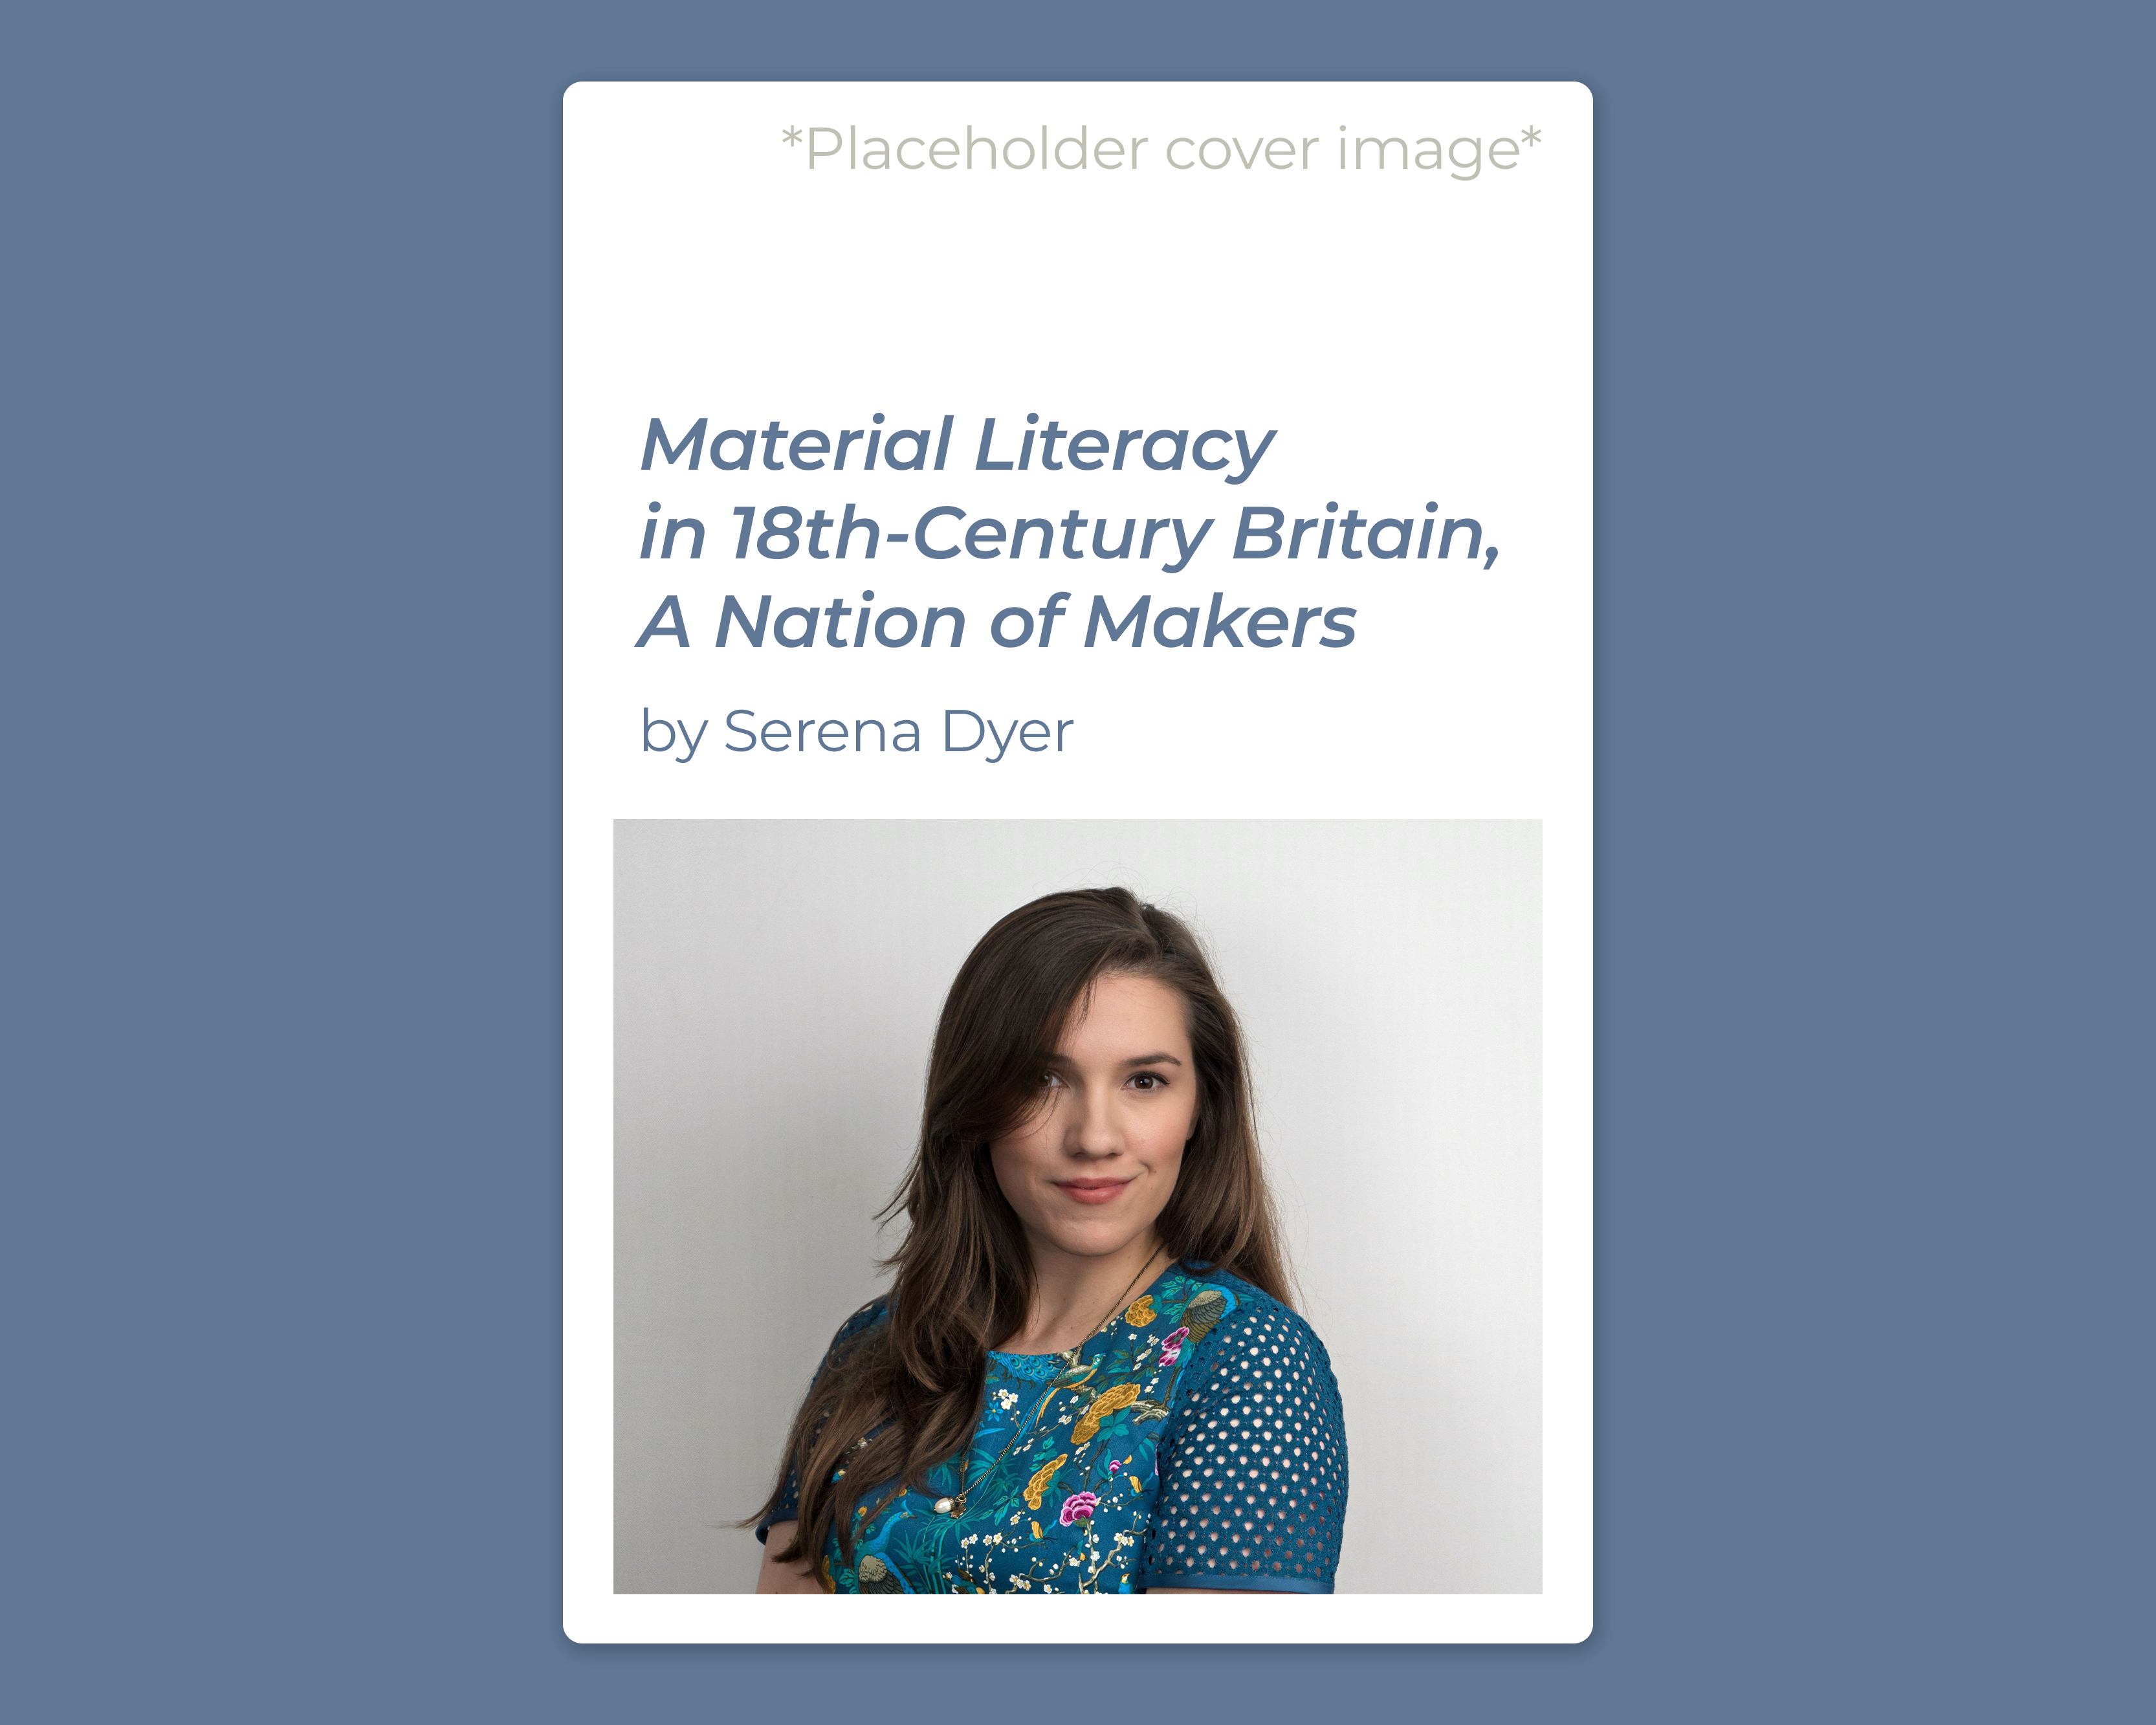 An image of a placeholder book cover. There is the title of the book; Material Literacy in 18th-Century Britain, A Nation of Makers. An image of the author is beneath.